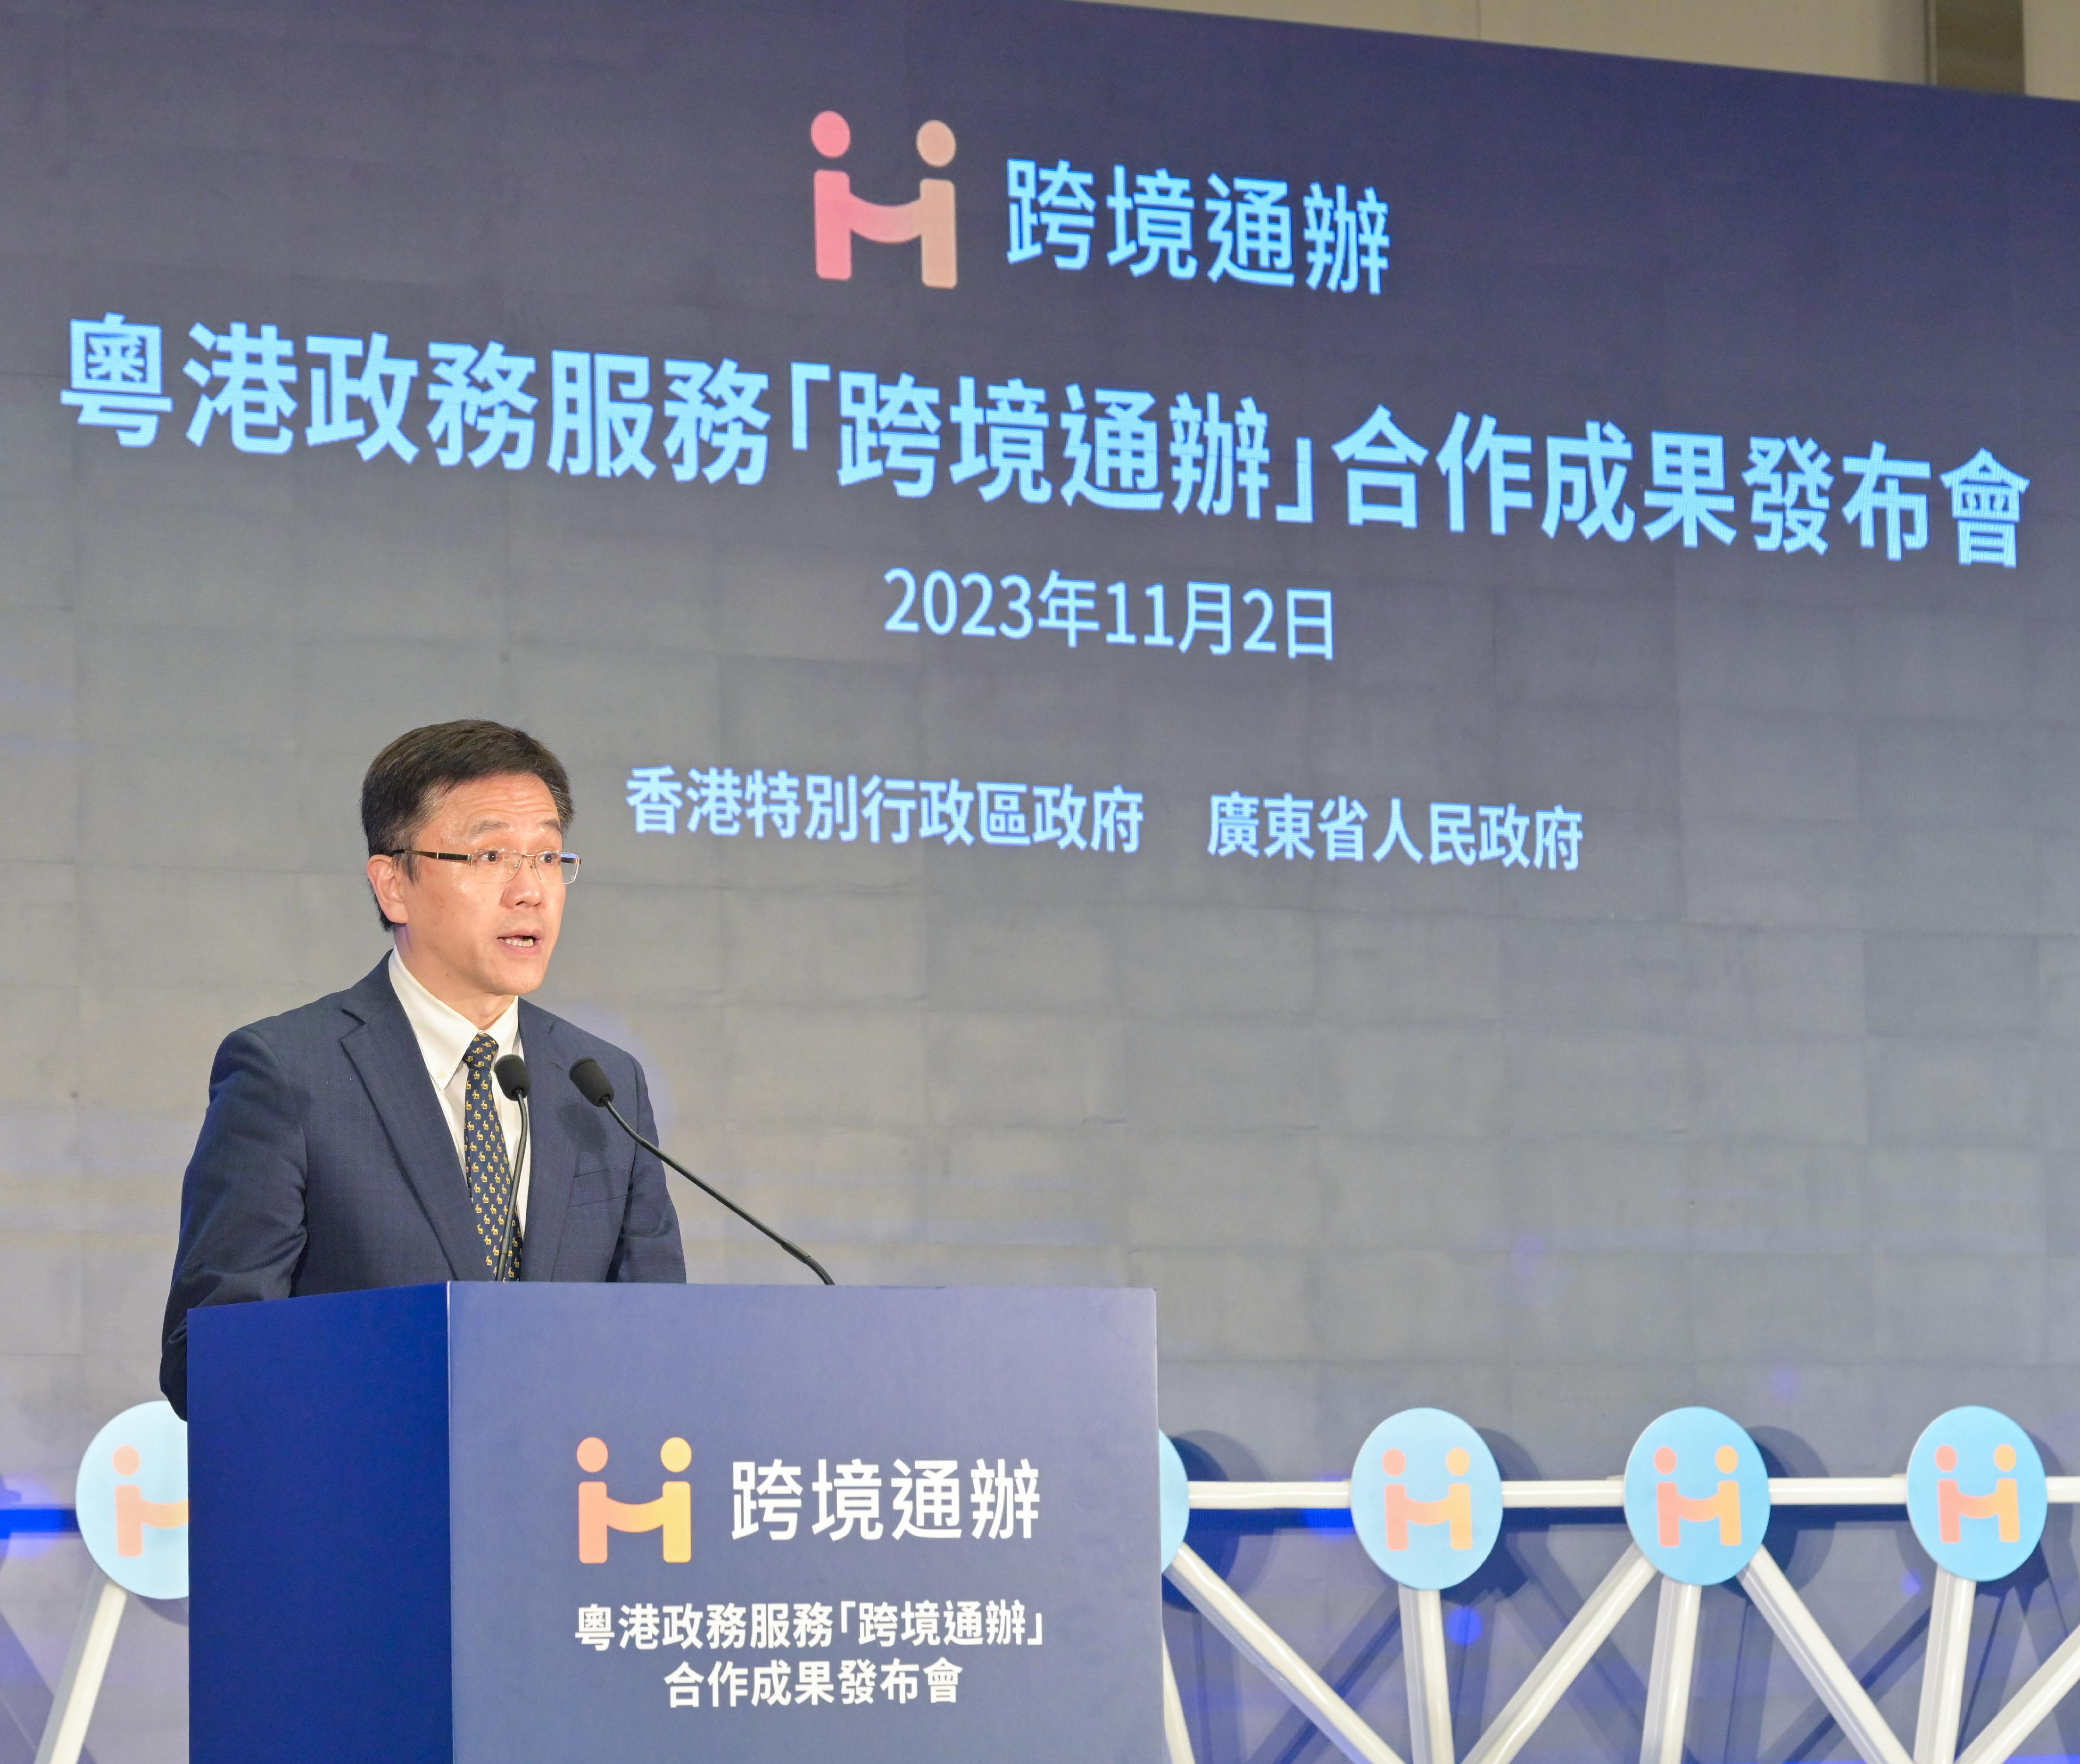 The Secretary for Innovation, Technology and Industry, Professor Sun Dong, speaks at the ceremony for promulgation of the Hong Kong/Guangdong Cross-boundary Public Services Co-operation Achievements today (November 2).